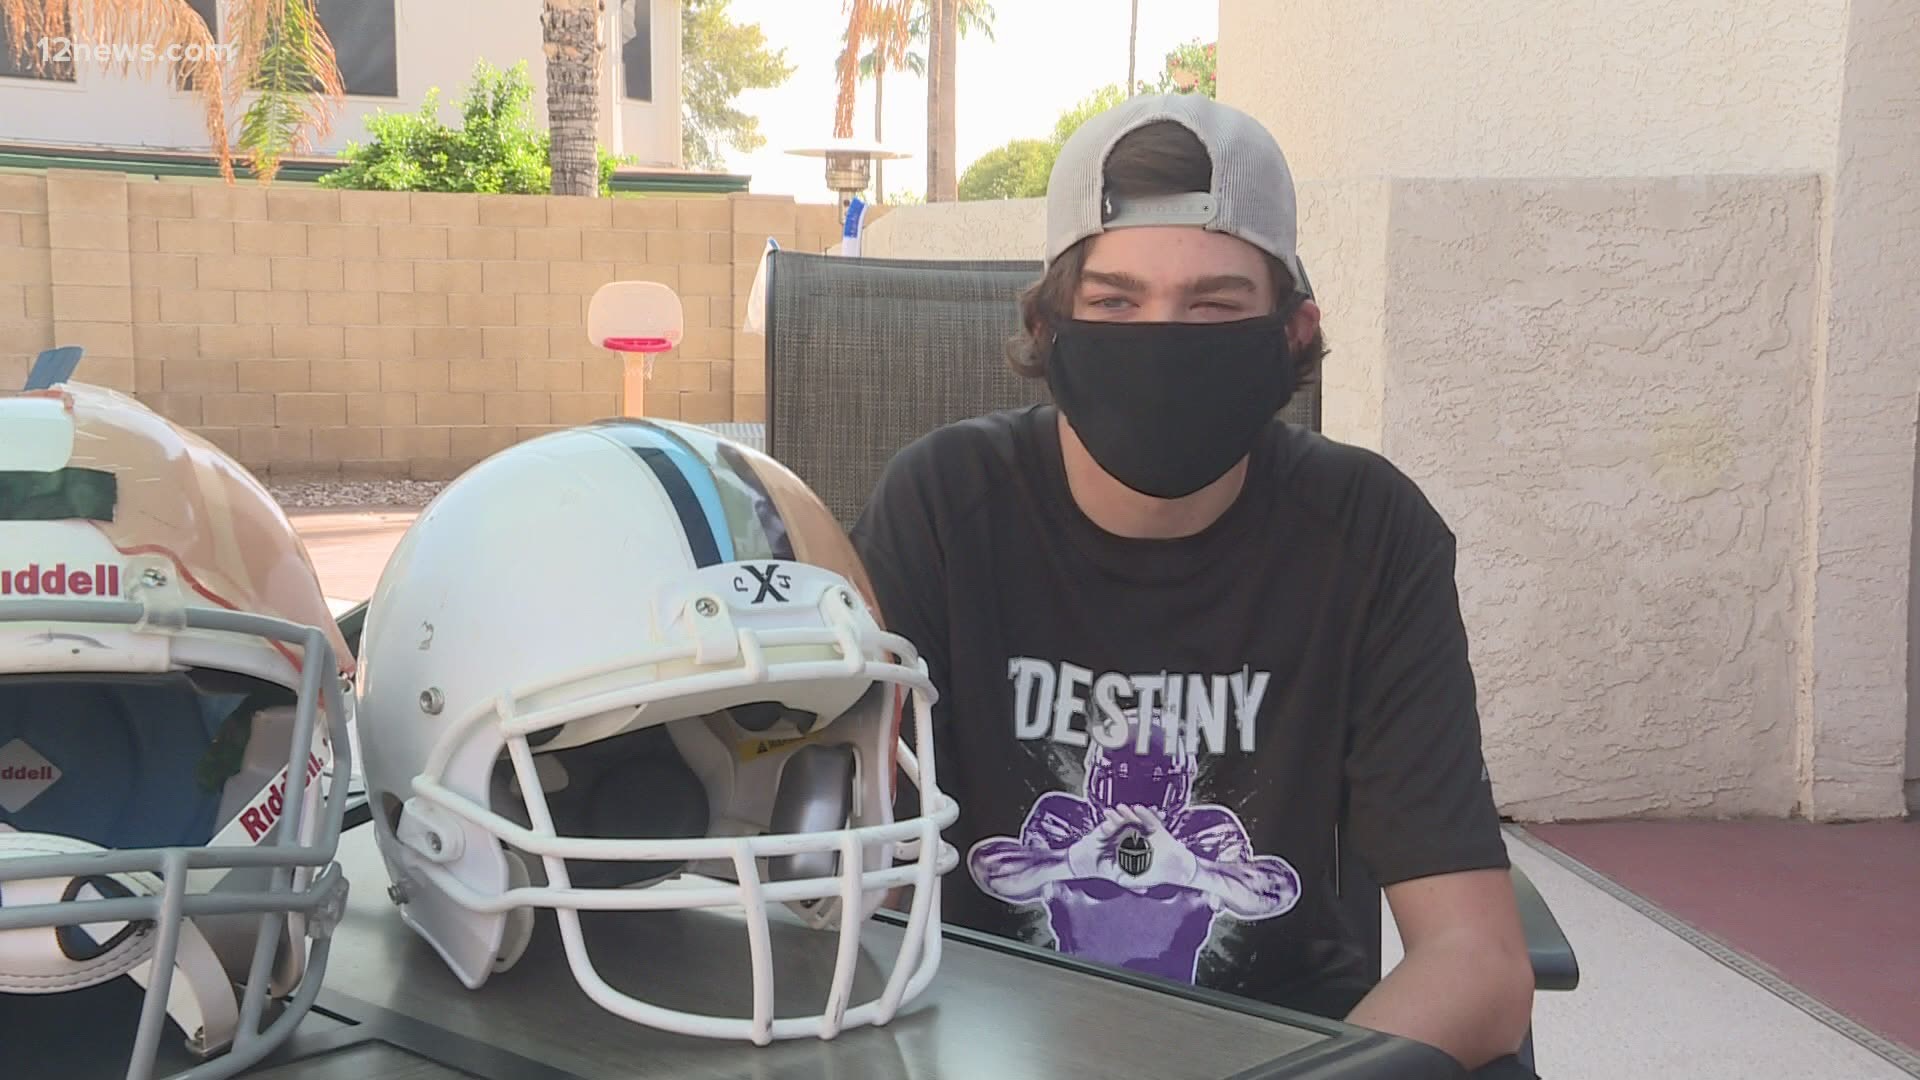 Researchers have been trying to find ways to make football safer. 14-year-old JT, a freshman at Arizona College Prep in Chandler, is working to solve the problem.